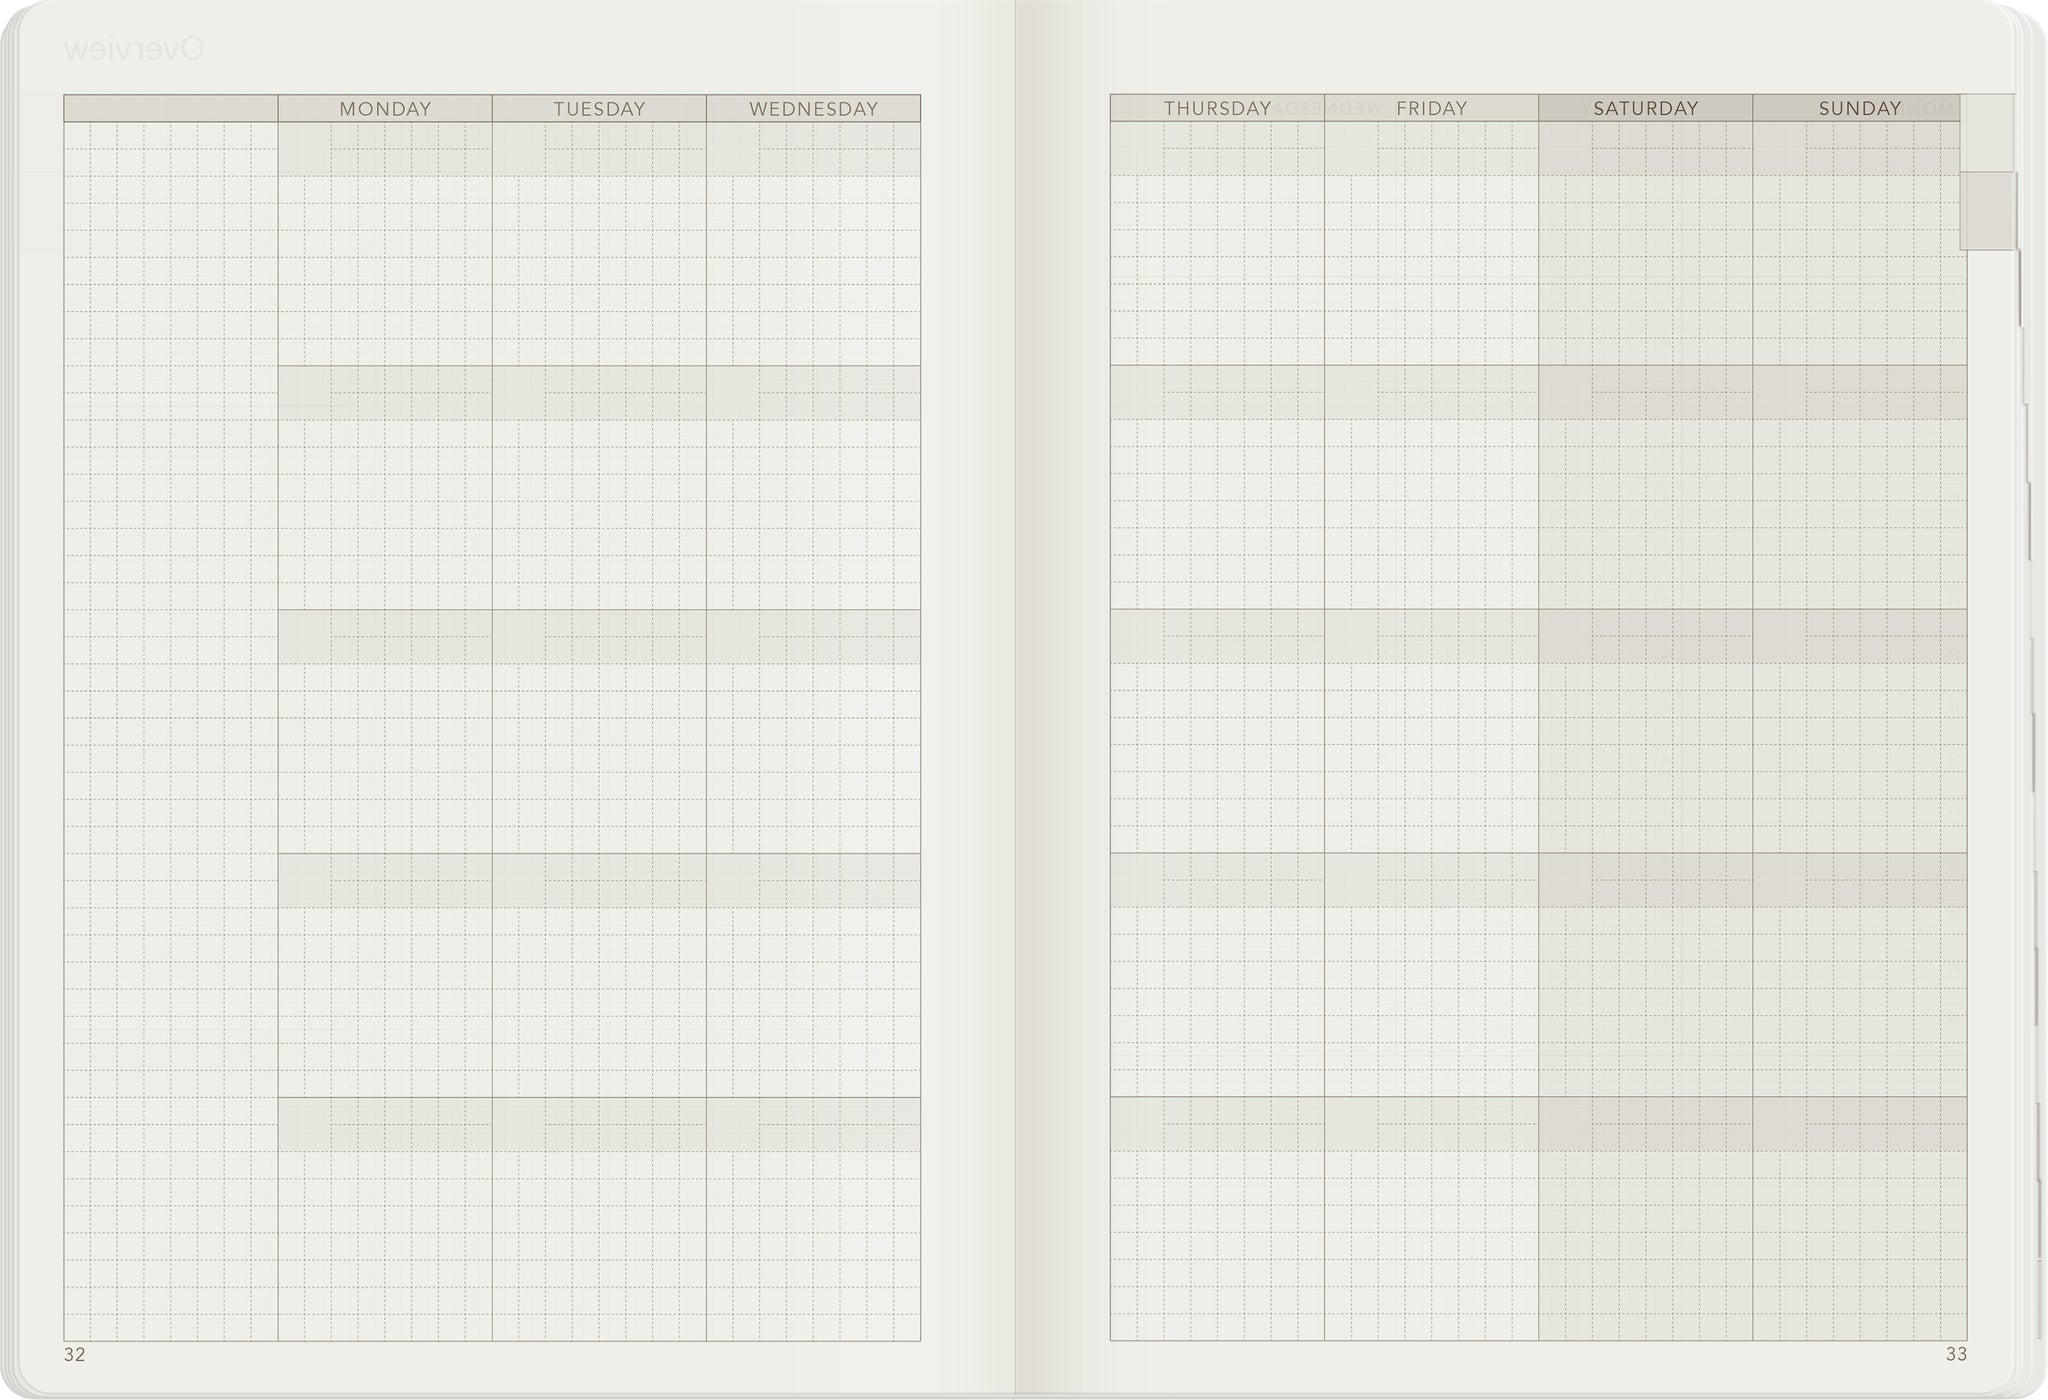 A5 Undated Weekly Planner - 52gsm Tomoe River Paper